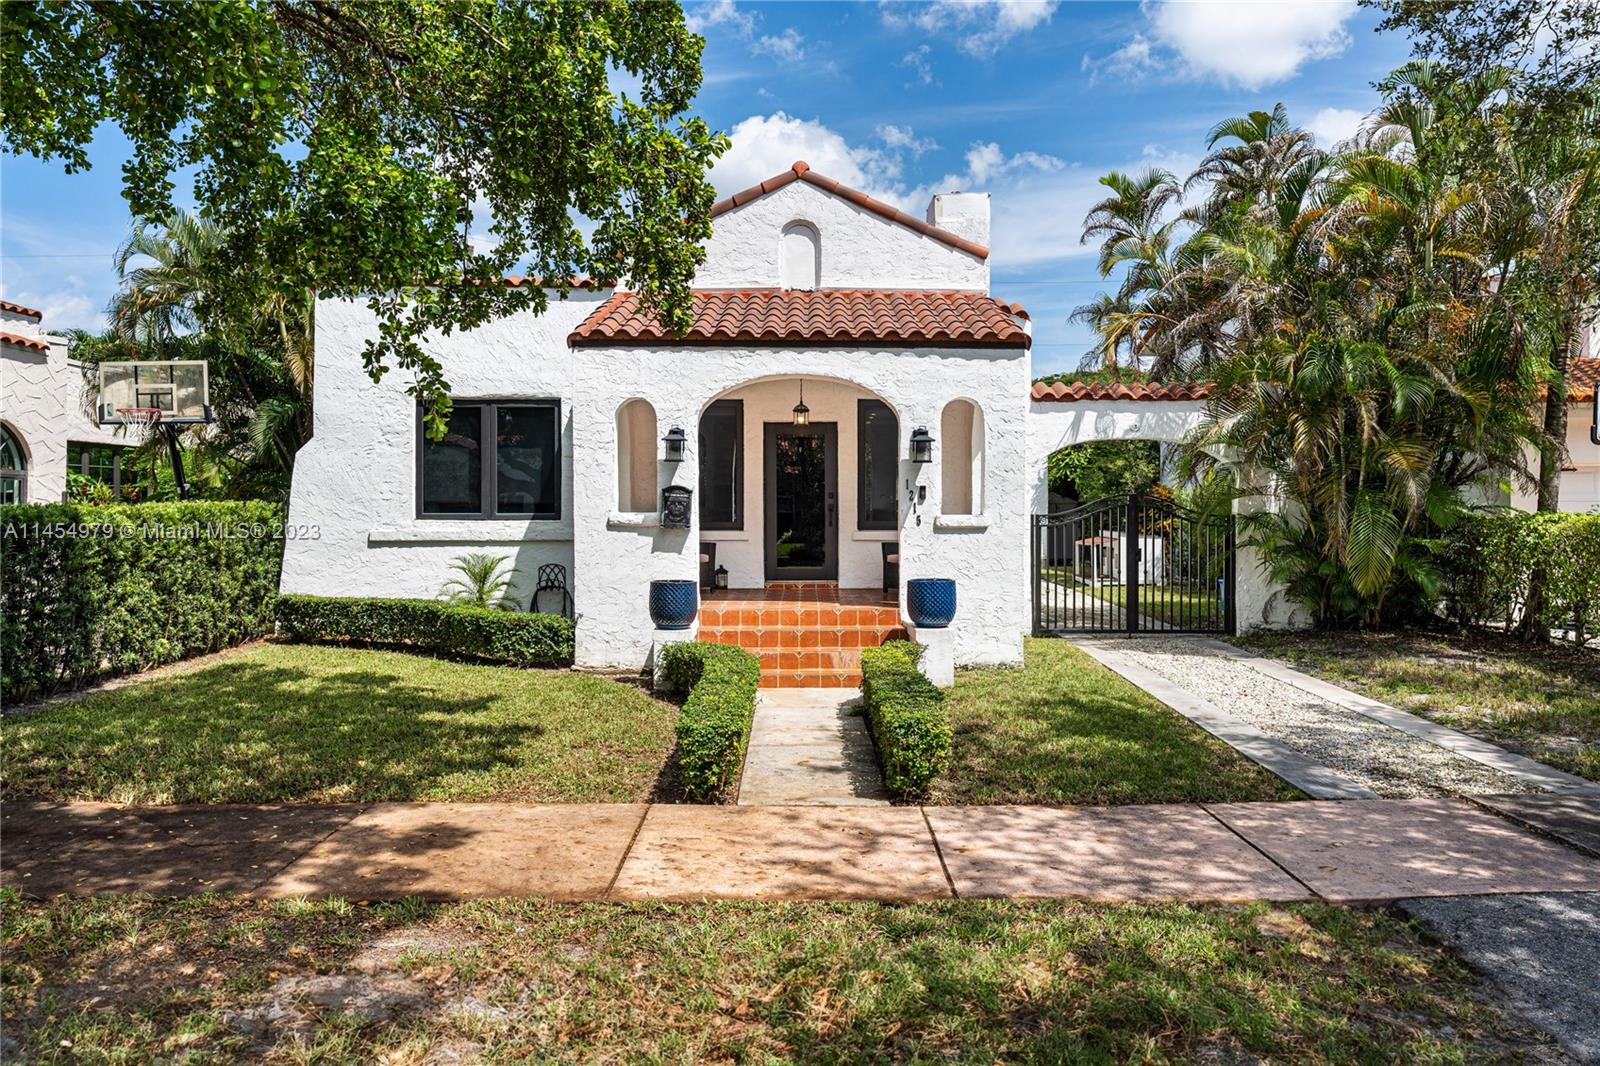 Nestled perfectly on one of the most picturesque tree-lined streets in Coral Gables. This virtually staged, gut renovated 1920's Spanish Bungalow is loaded with old school charm with all of today's modern finishes you love. Meticulously restored in 2020, this bungalow sits on a 5,000 S.F. lot and has 2Bd/2Ba with 1,374 S.F. under air. The restoration of this charming home included a new roof, new septic tank, new high impact windows and doors, all new kitchen cabinets w/ SS appliances, new bathrooms, and all new electric and pluming and more. Home has detached garage that has been converted to a gym. Enjoy all that Coral Gables "City Beautiful" has to offer, including world class dining and premier shopping or just immerse yourself in its historic charm. See Broker Remarks